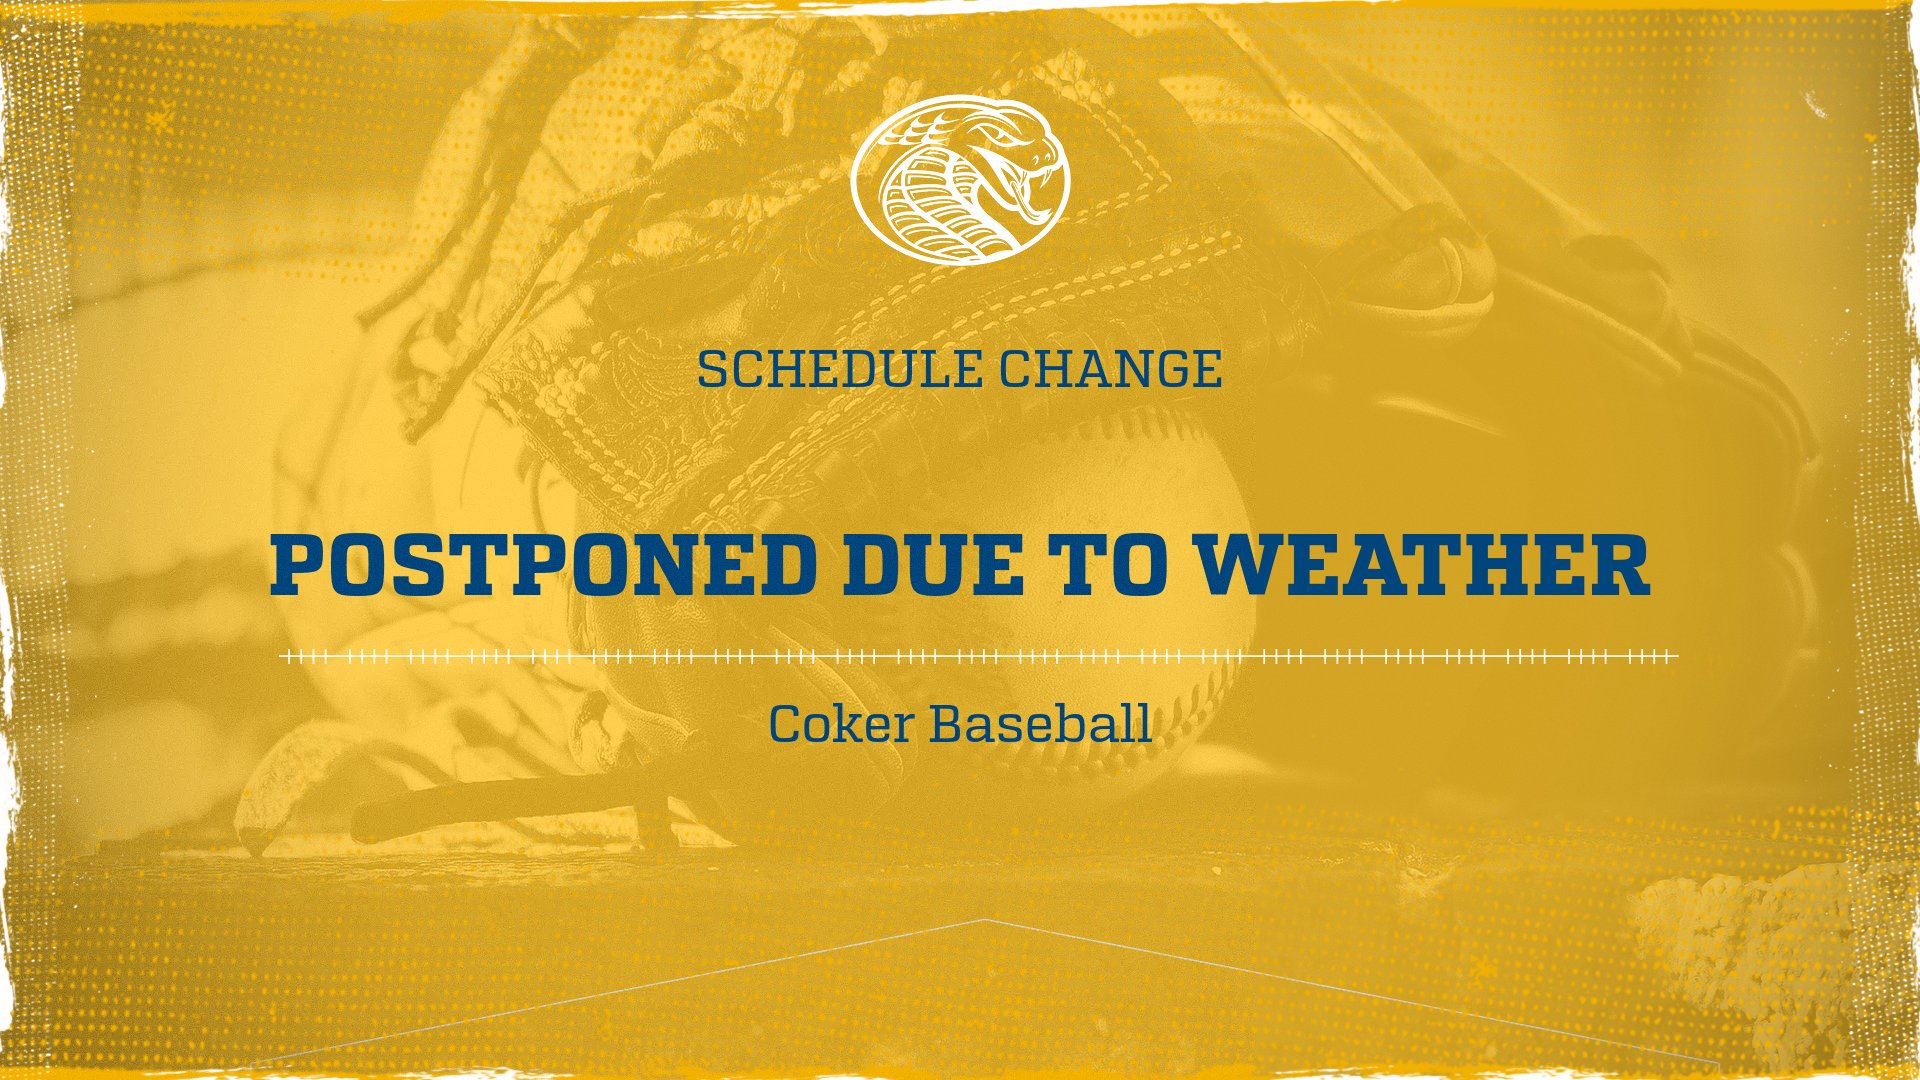 Games Rescheduled Due to Weather